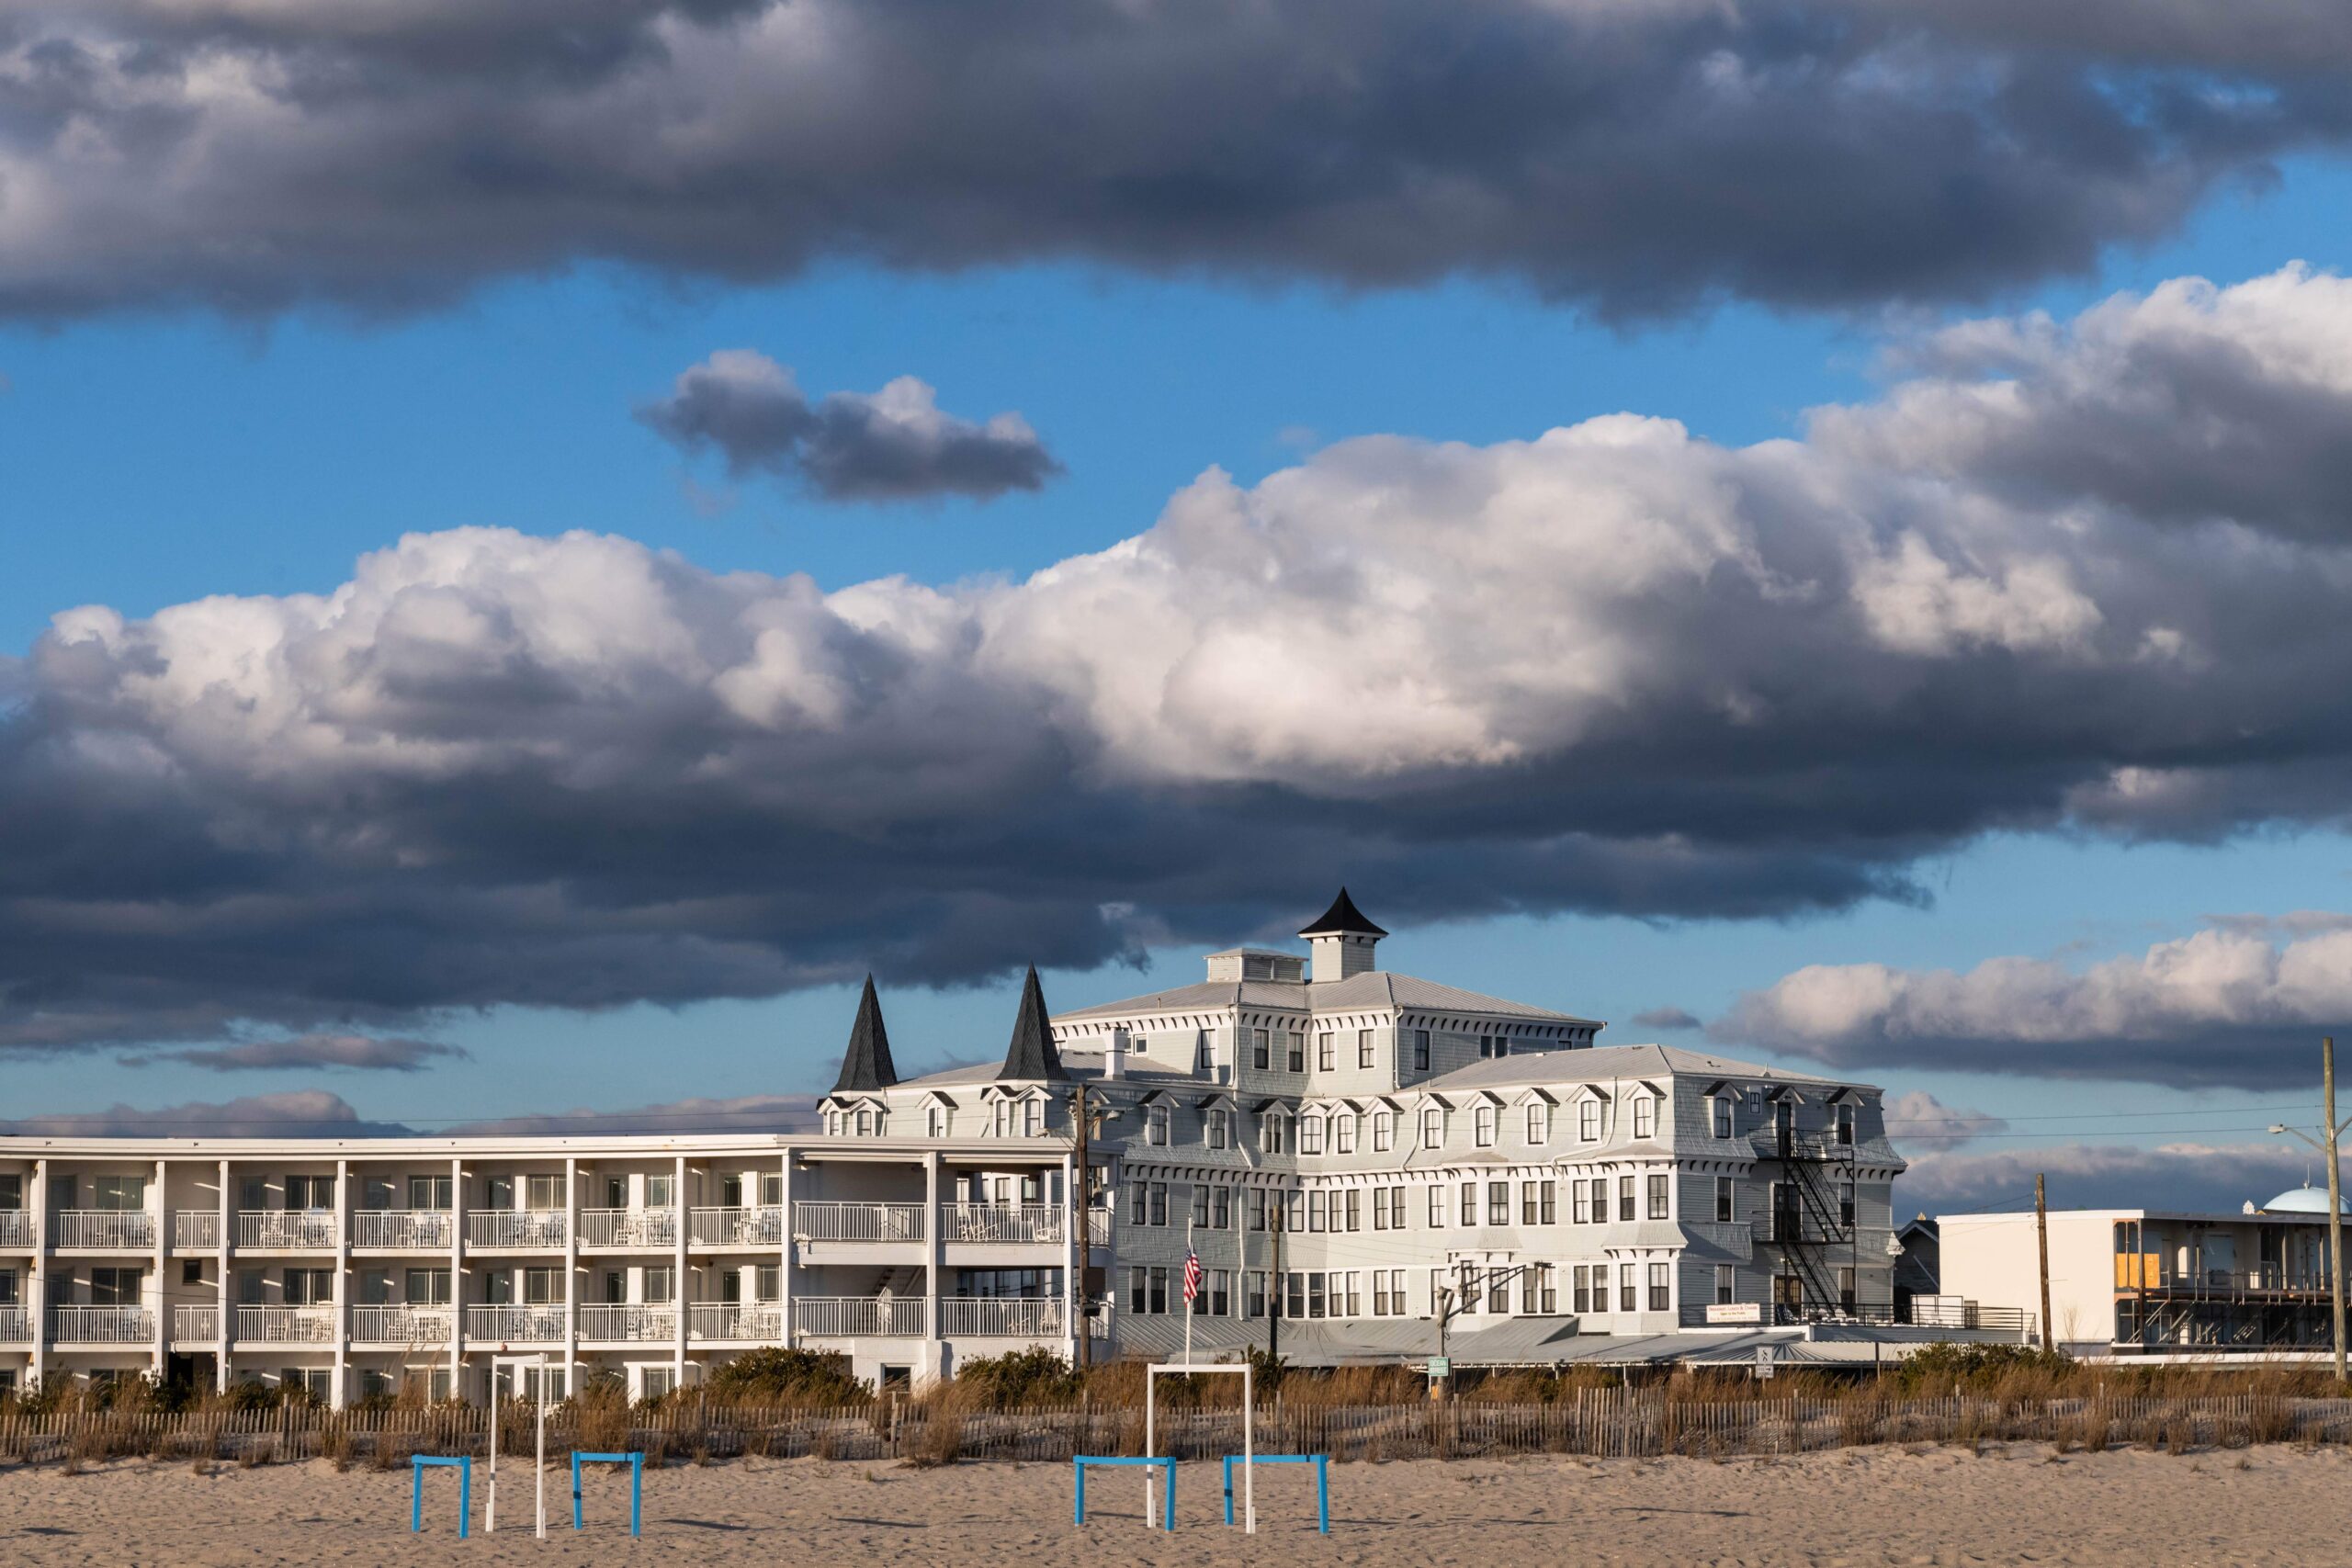 The Inn of Cape May, a white and gray Victorian styled bed and breakfast, with the beach in the foreground and white and gray puffy clouds in a blue sky